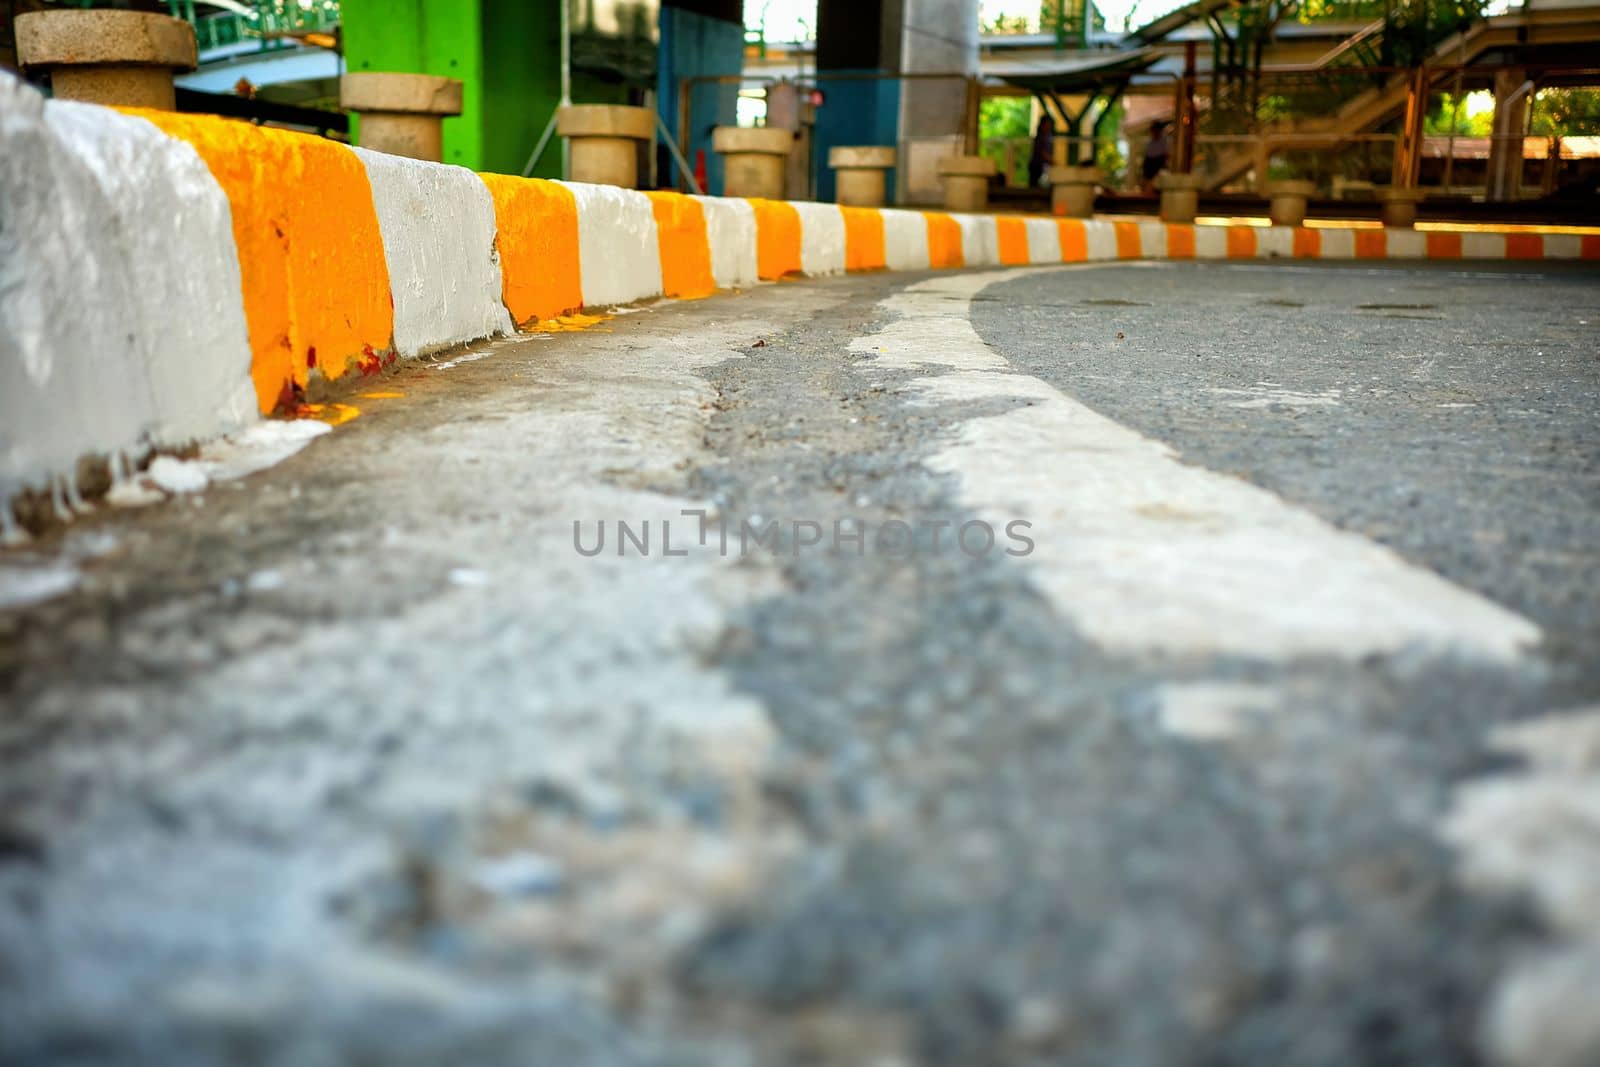 Bottom of Road, Selective Focus on White and Yellow Footpath.